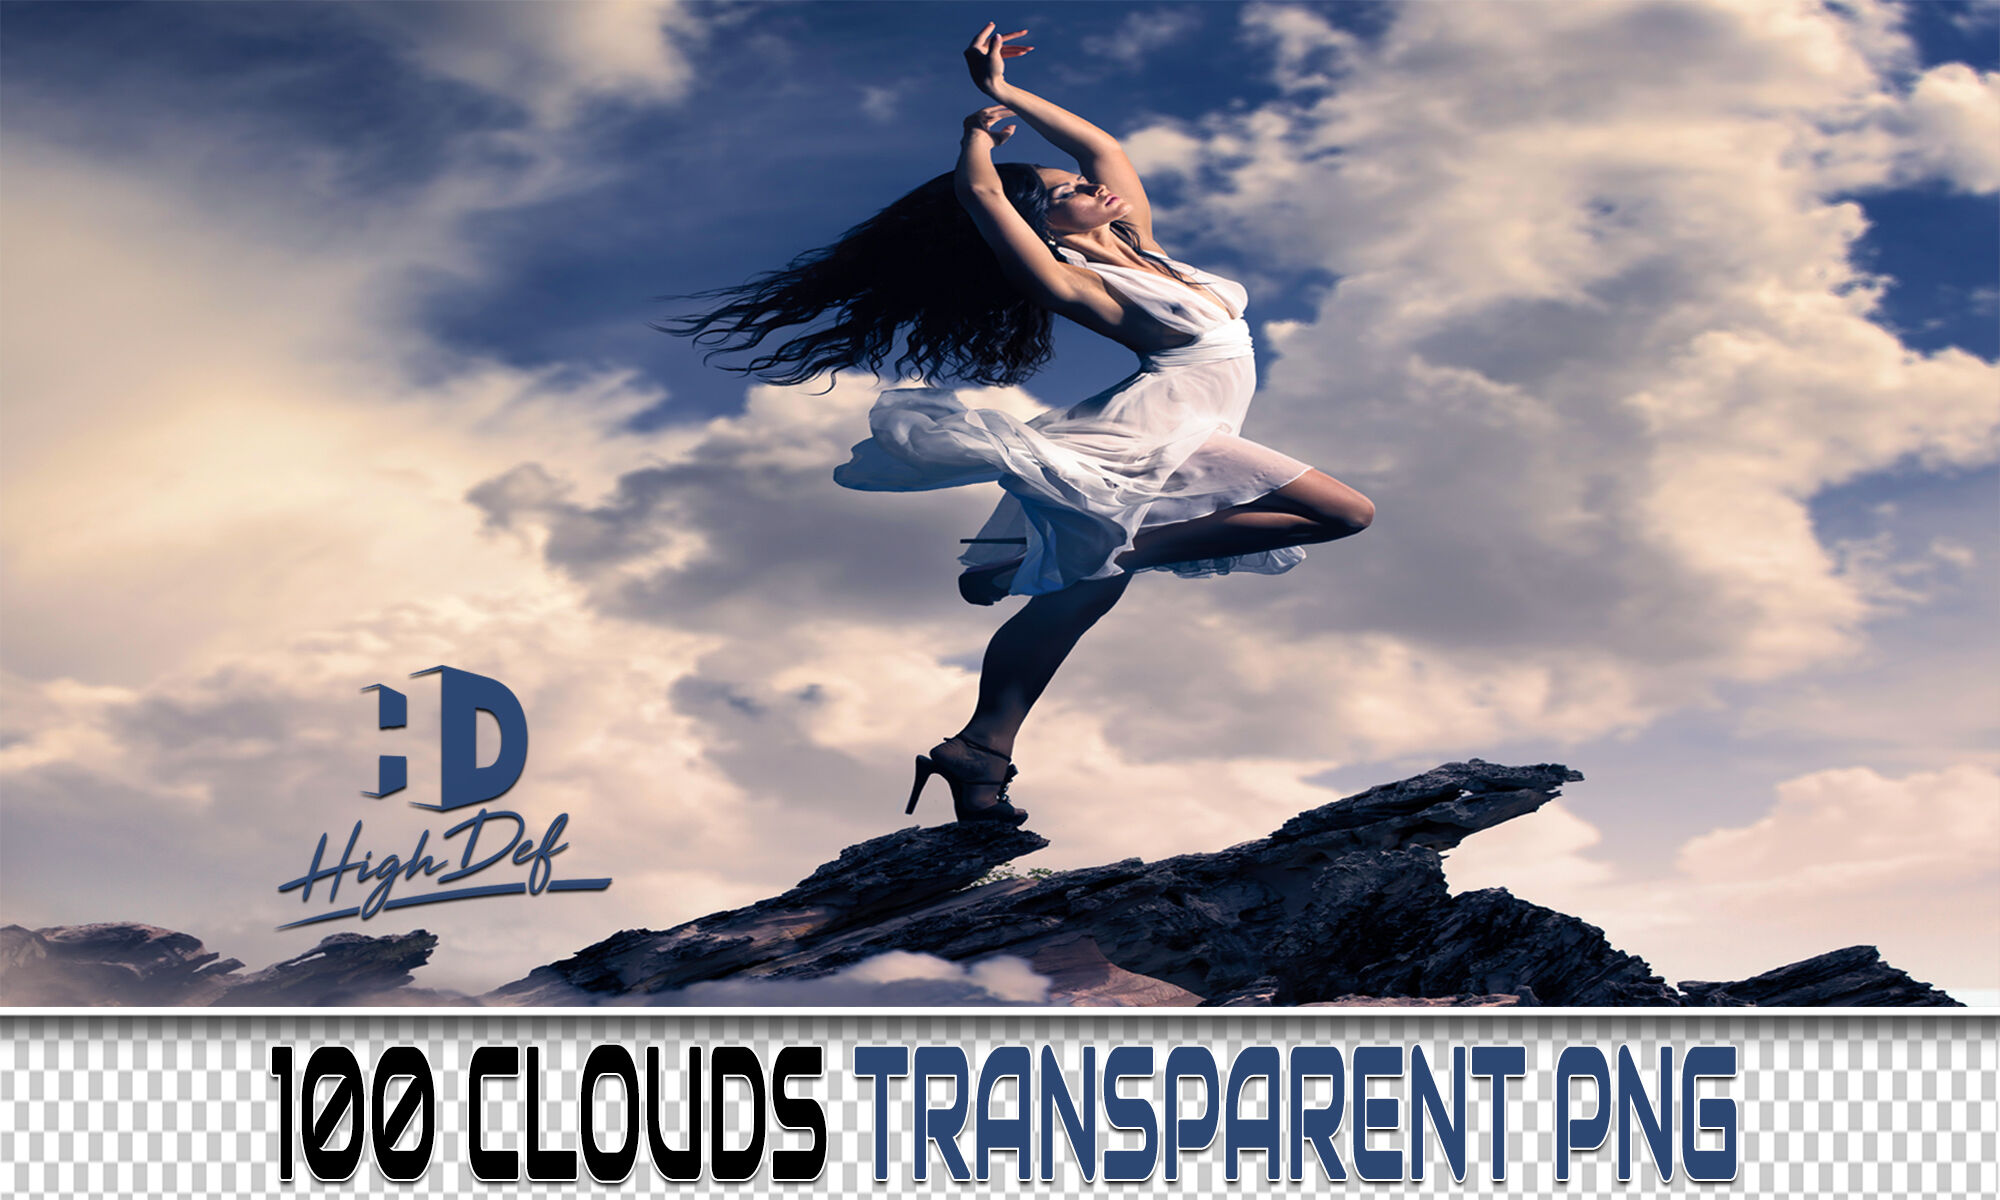 100 Clouds Transparent Png Photoshop Overlays Backdrops Backgrounds By Digital Media Design Thehungryjpeg Com